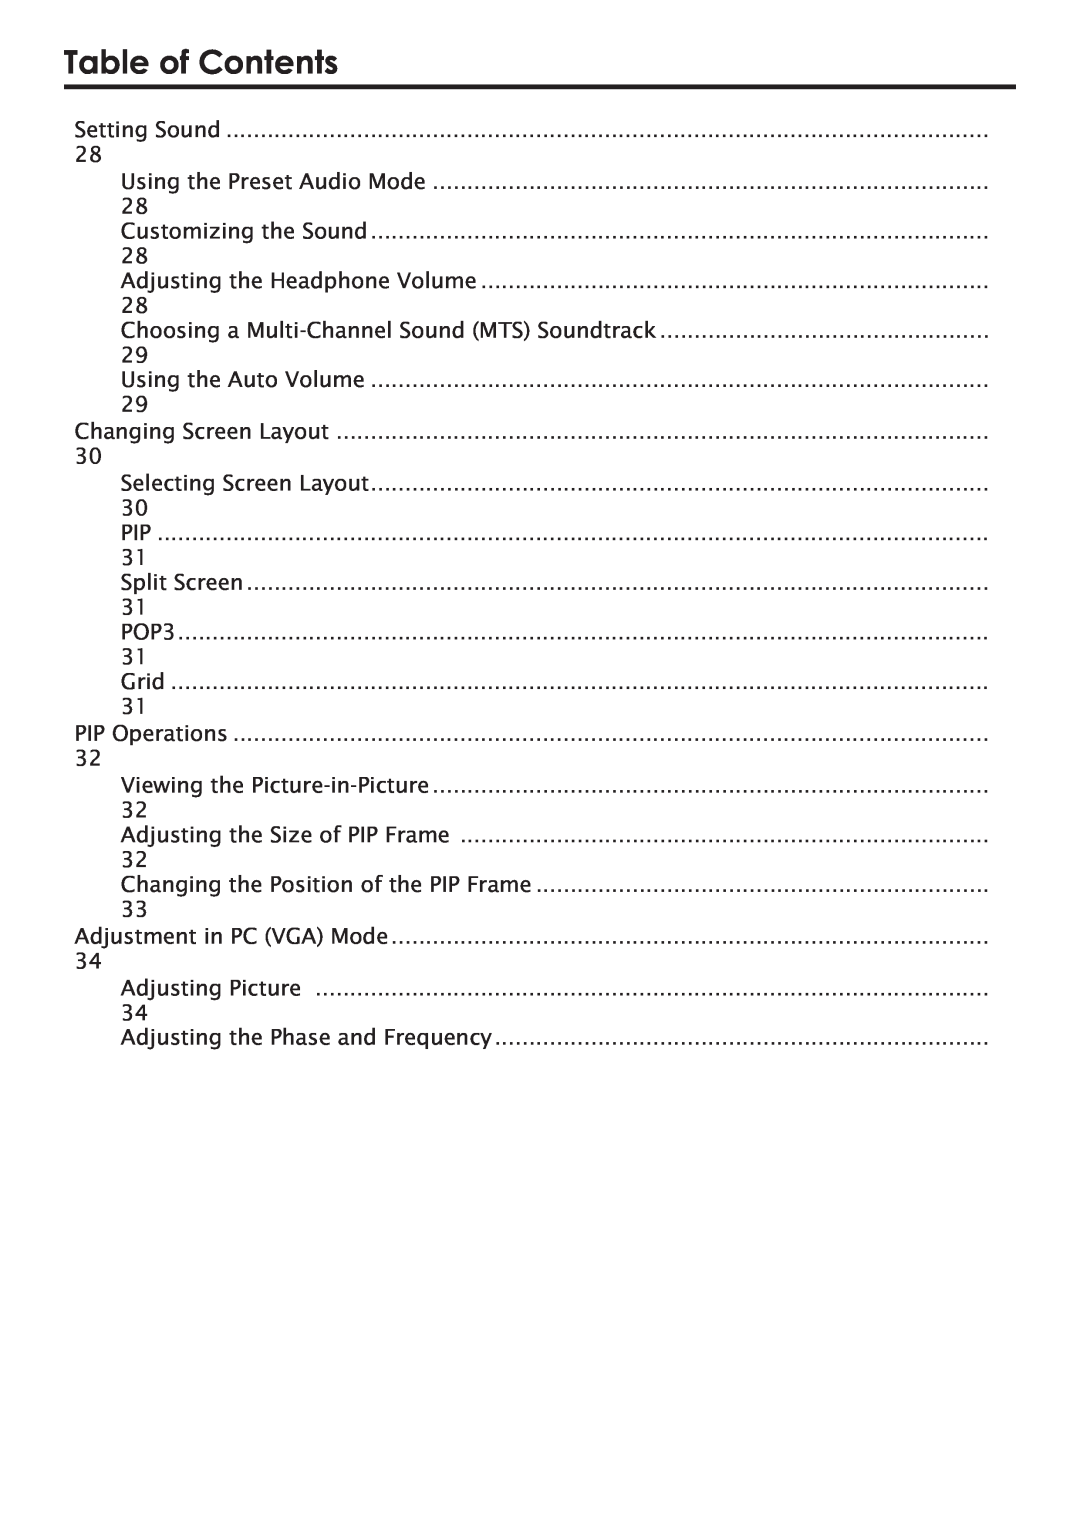 Primate Systems PDP TV manual Table of Contents, Setting Sound 